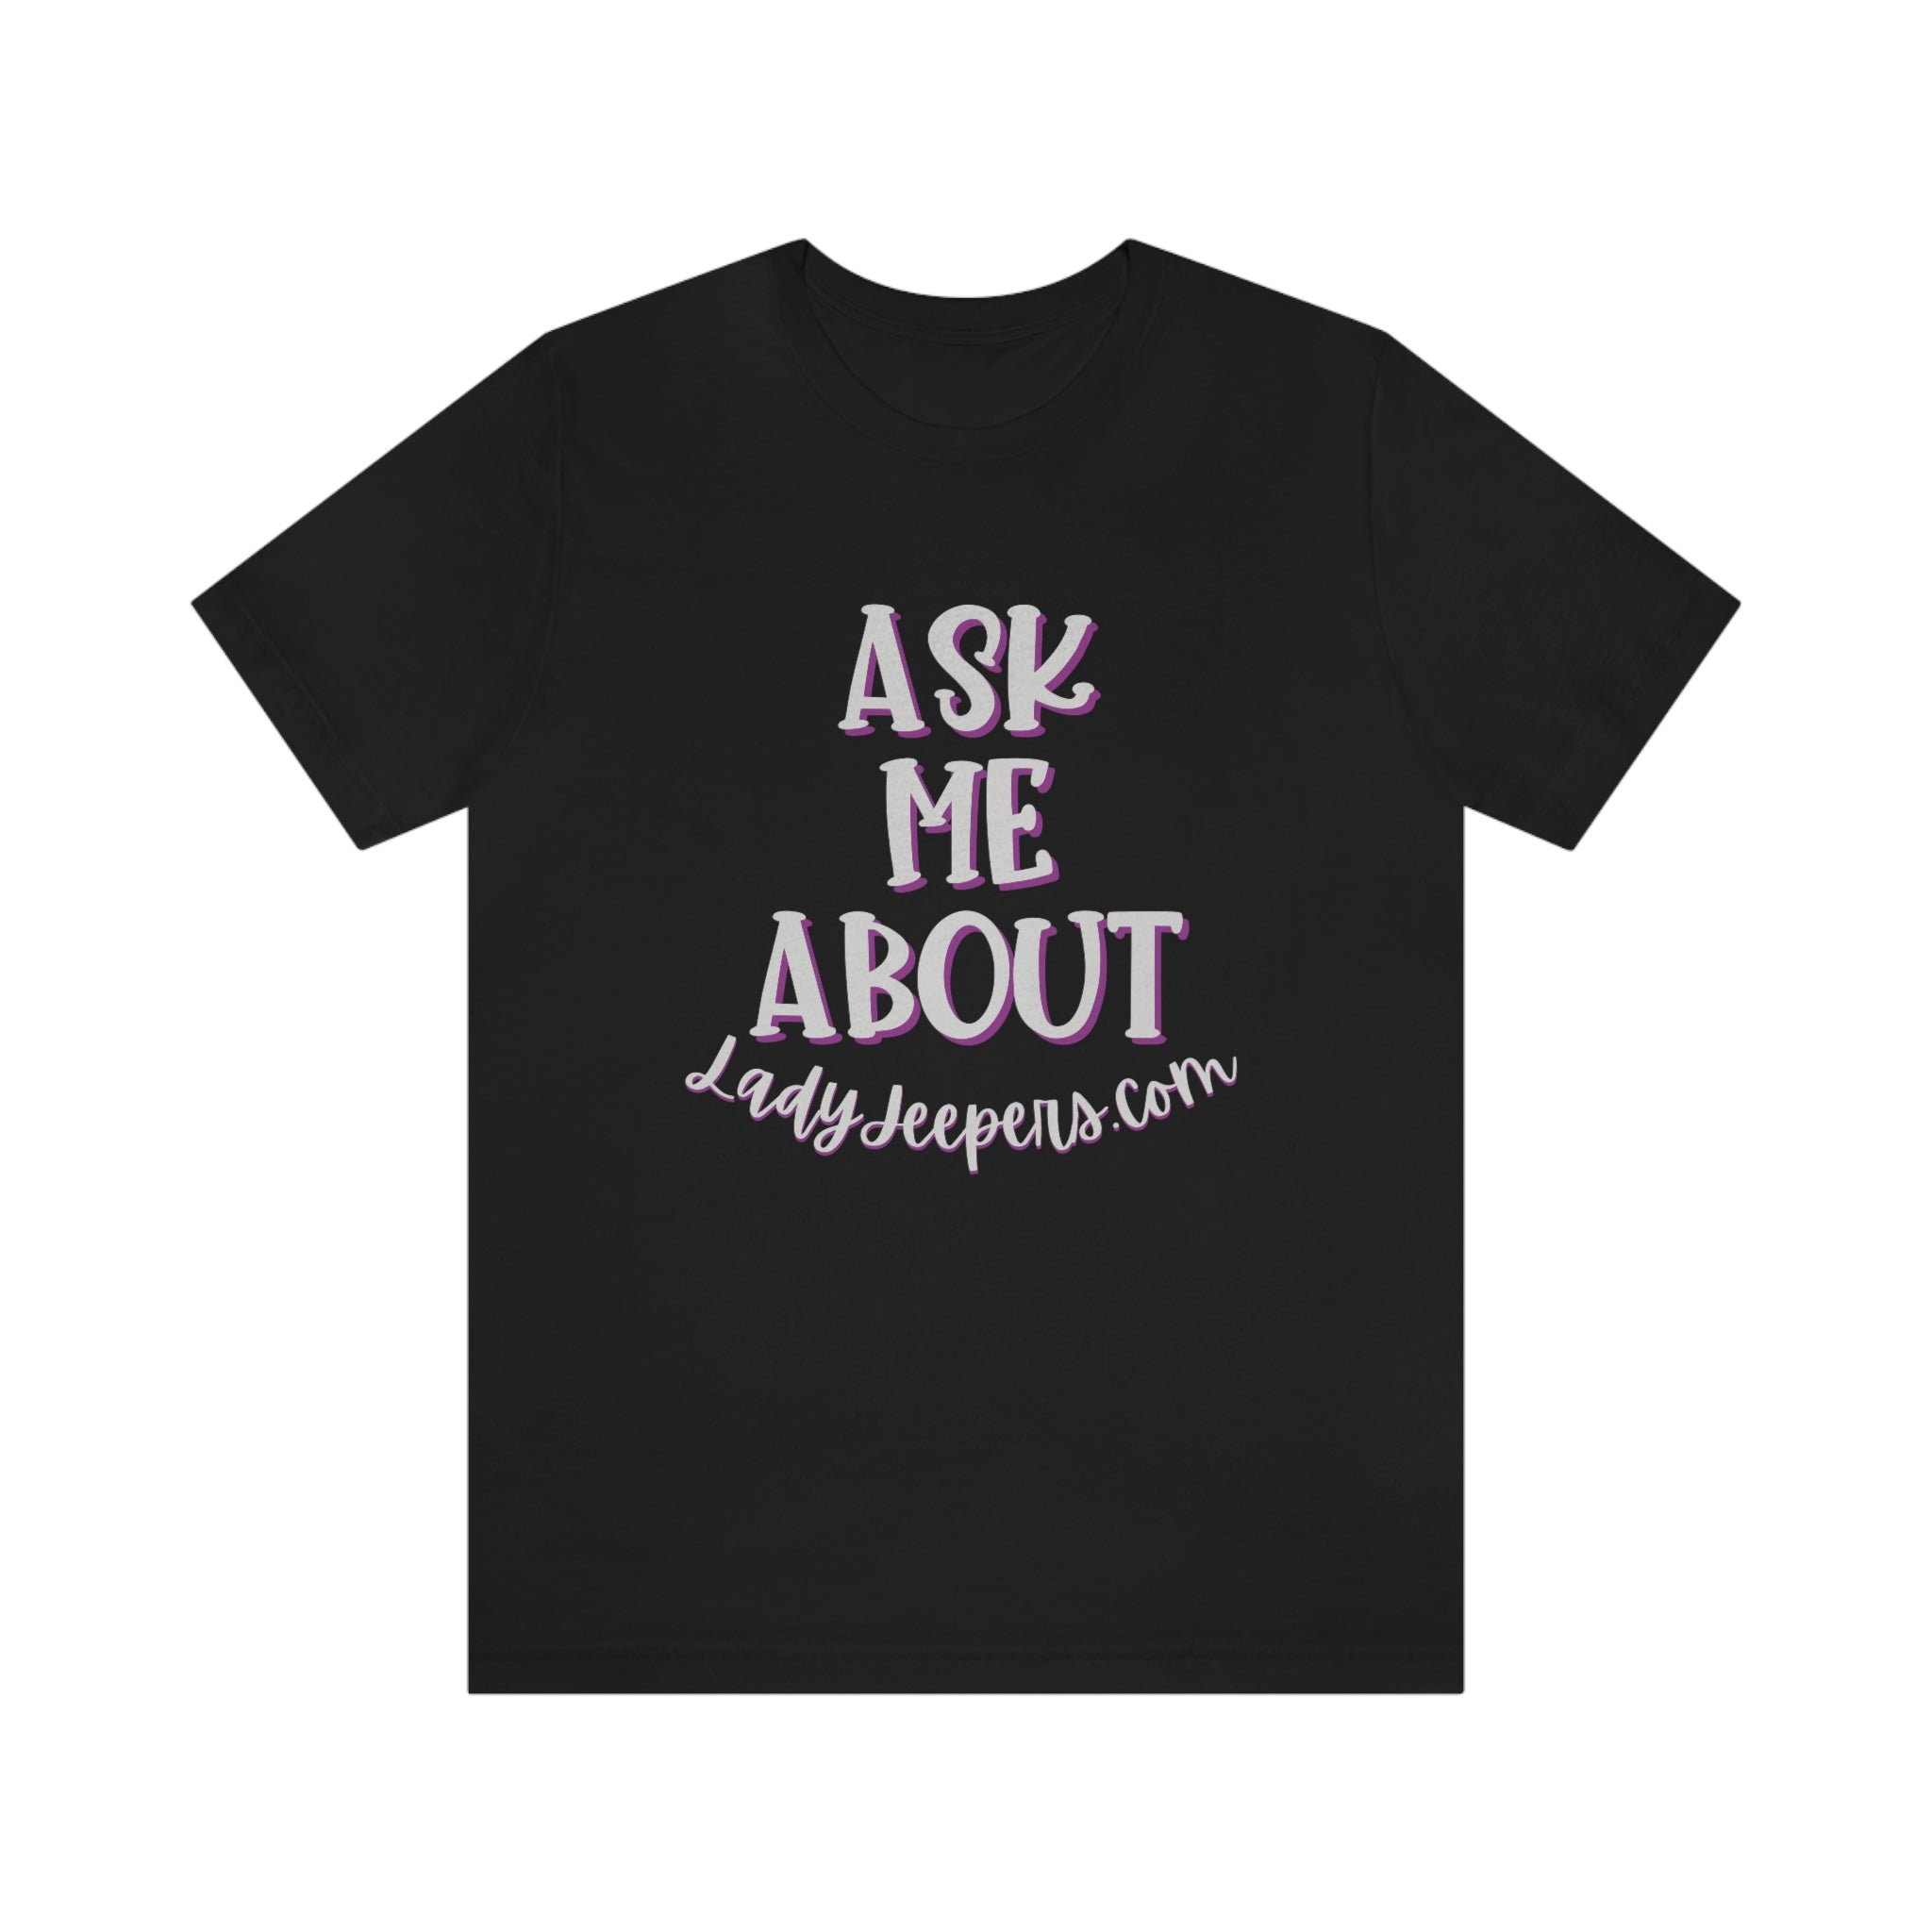 Black & Grey Ask Me About LadyJeepers.com T-Shirt